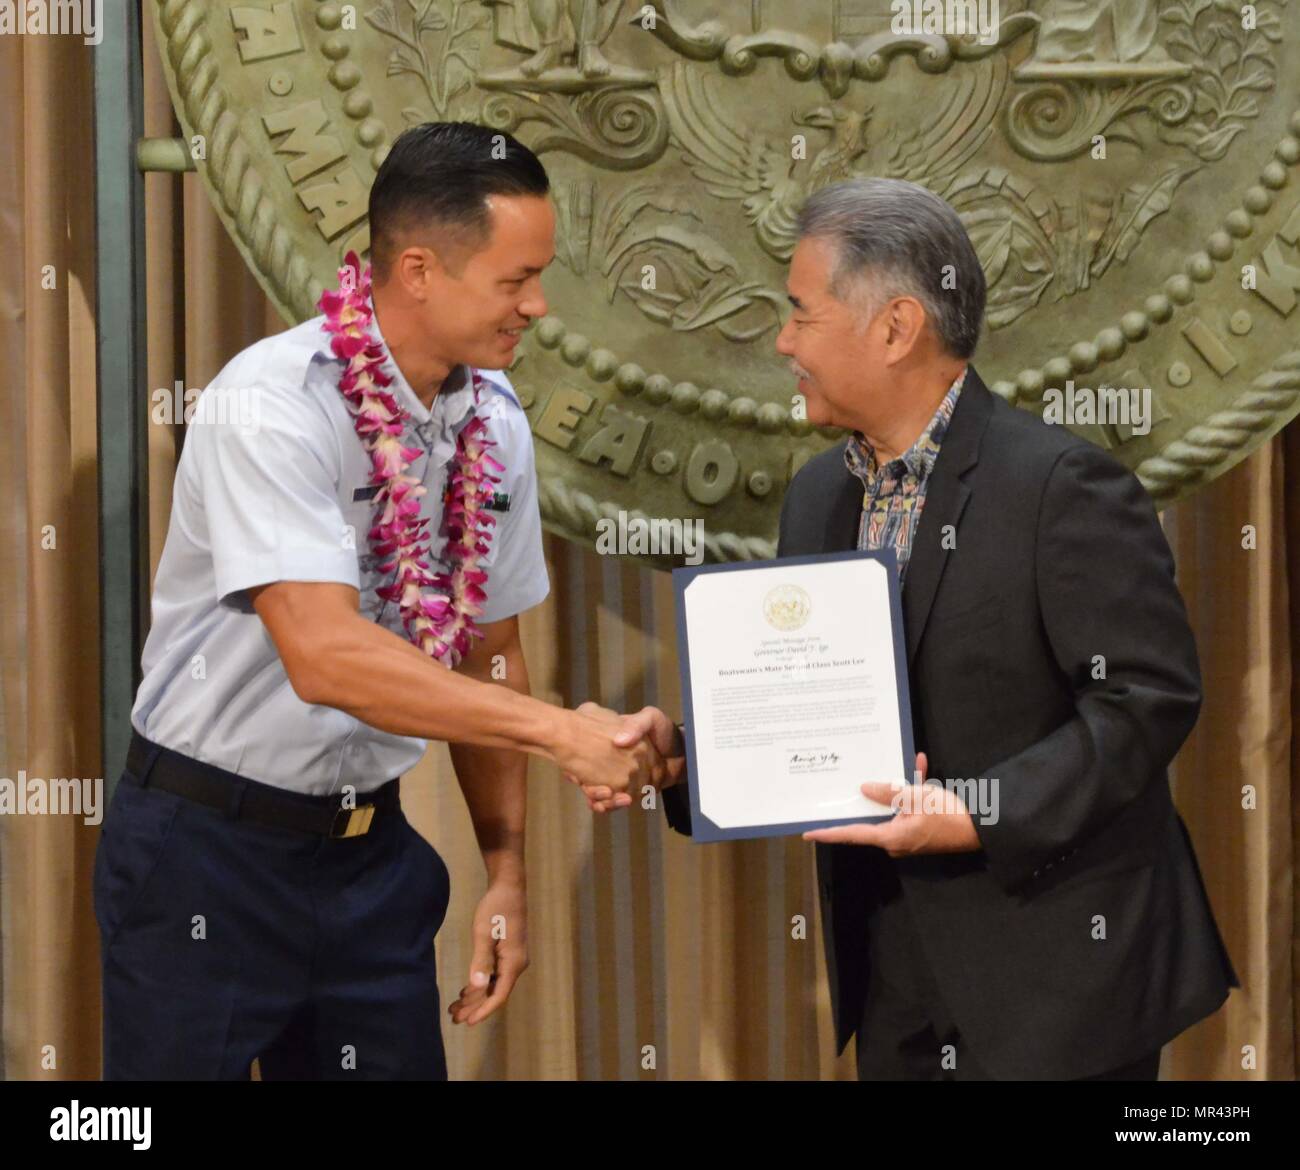 Petty Officer 2nd Class Scott Lee, a boatswain’s mate stationed at Coast Guard Station Honolulu, was recognized for his outstanding community service by Hawaii State Governor David Y. Ige at the Hawaii State Capitol, May 5, 2017. The Military Affairs Council of the Chamber of Commerce Hawaii joined Governor Ige in a proclamation ceremony designating May as Military Appreciation Month and honoring service members from all five branches of the armed forces for their community service contributions. (U.S. Coast Guard photo by Petty Officer 2nd Class Melissa E. McKenzie/Released) Stock Photo